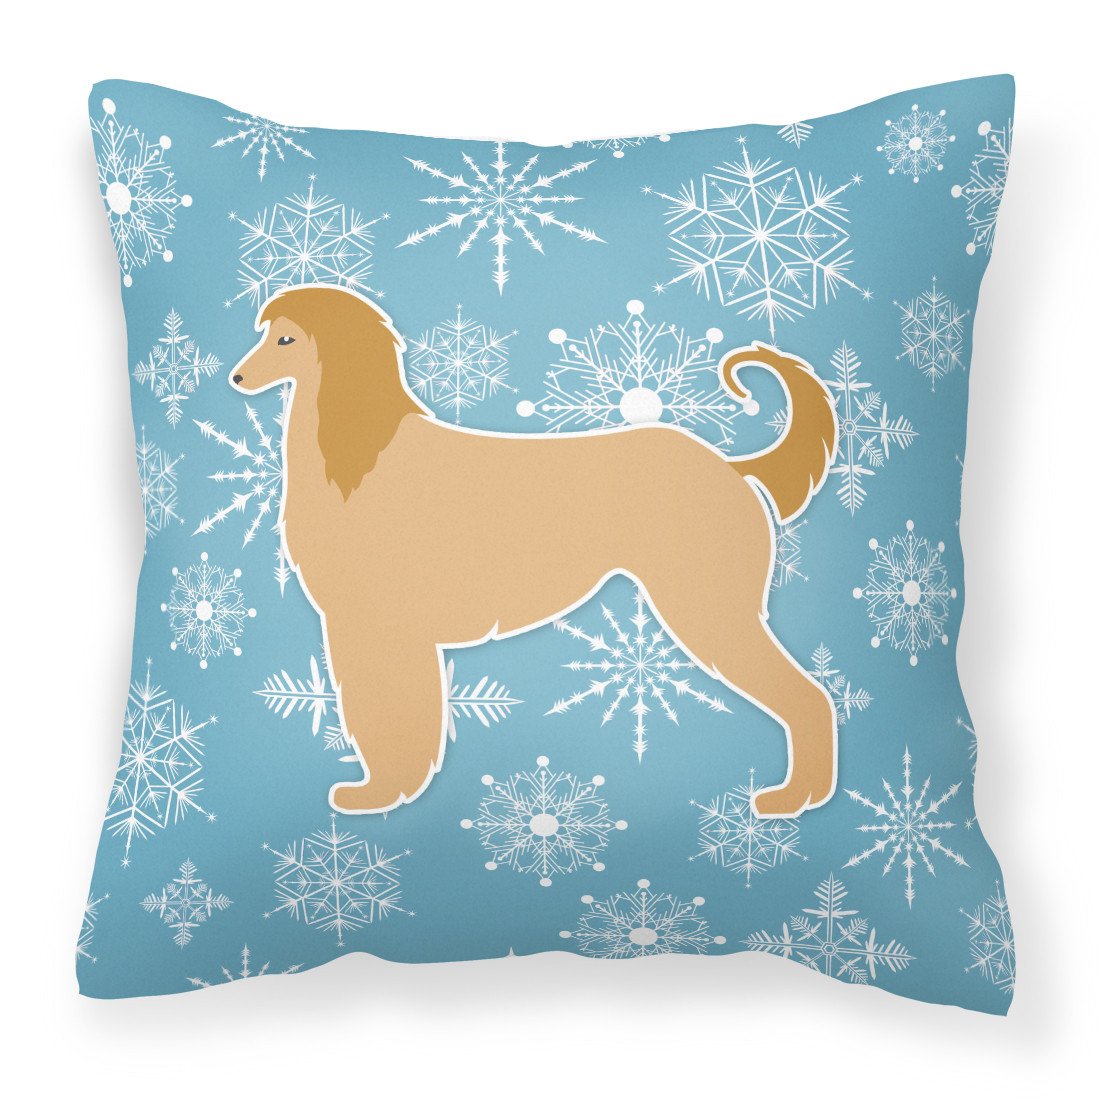 Winter Snowflake Afghan Hound Fabric Decorative Pillow BB3506PW1818 by Caroline's Treasures